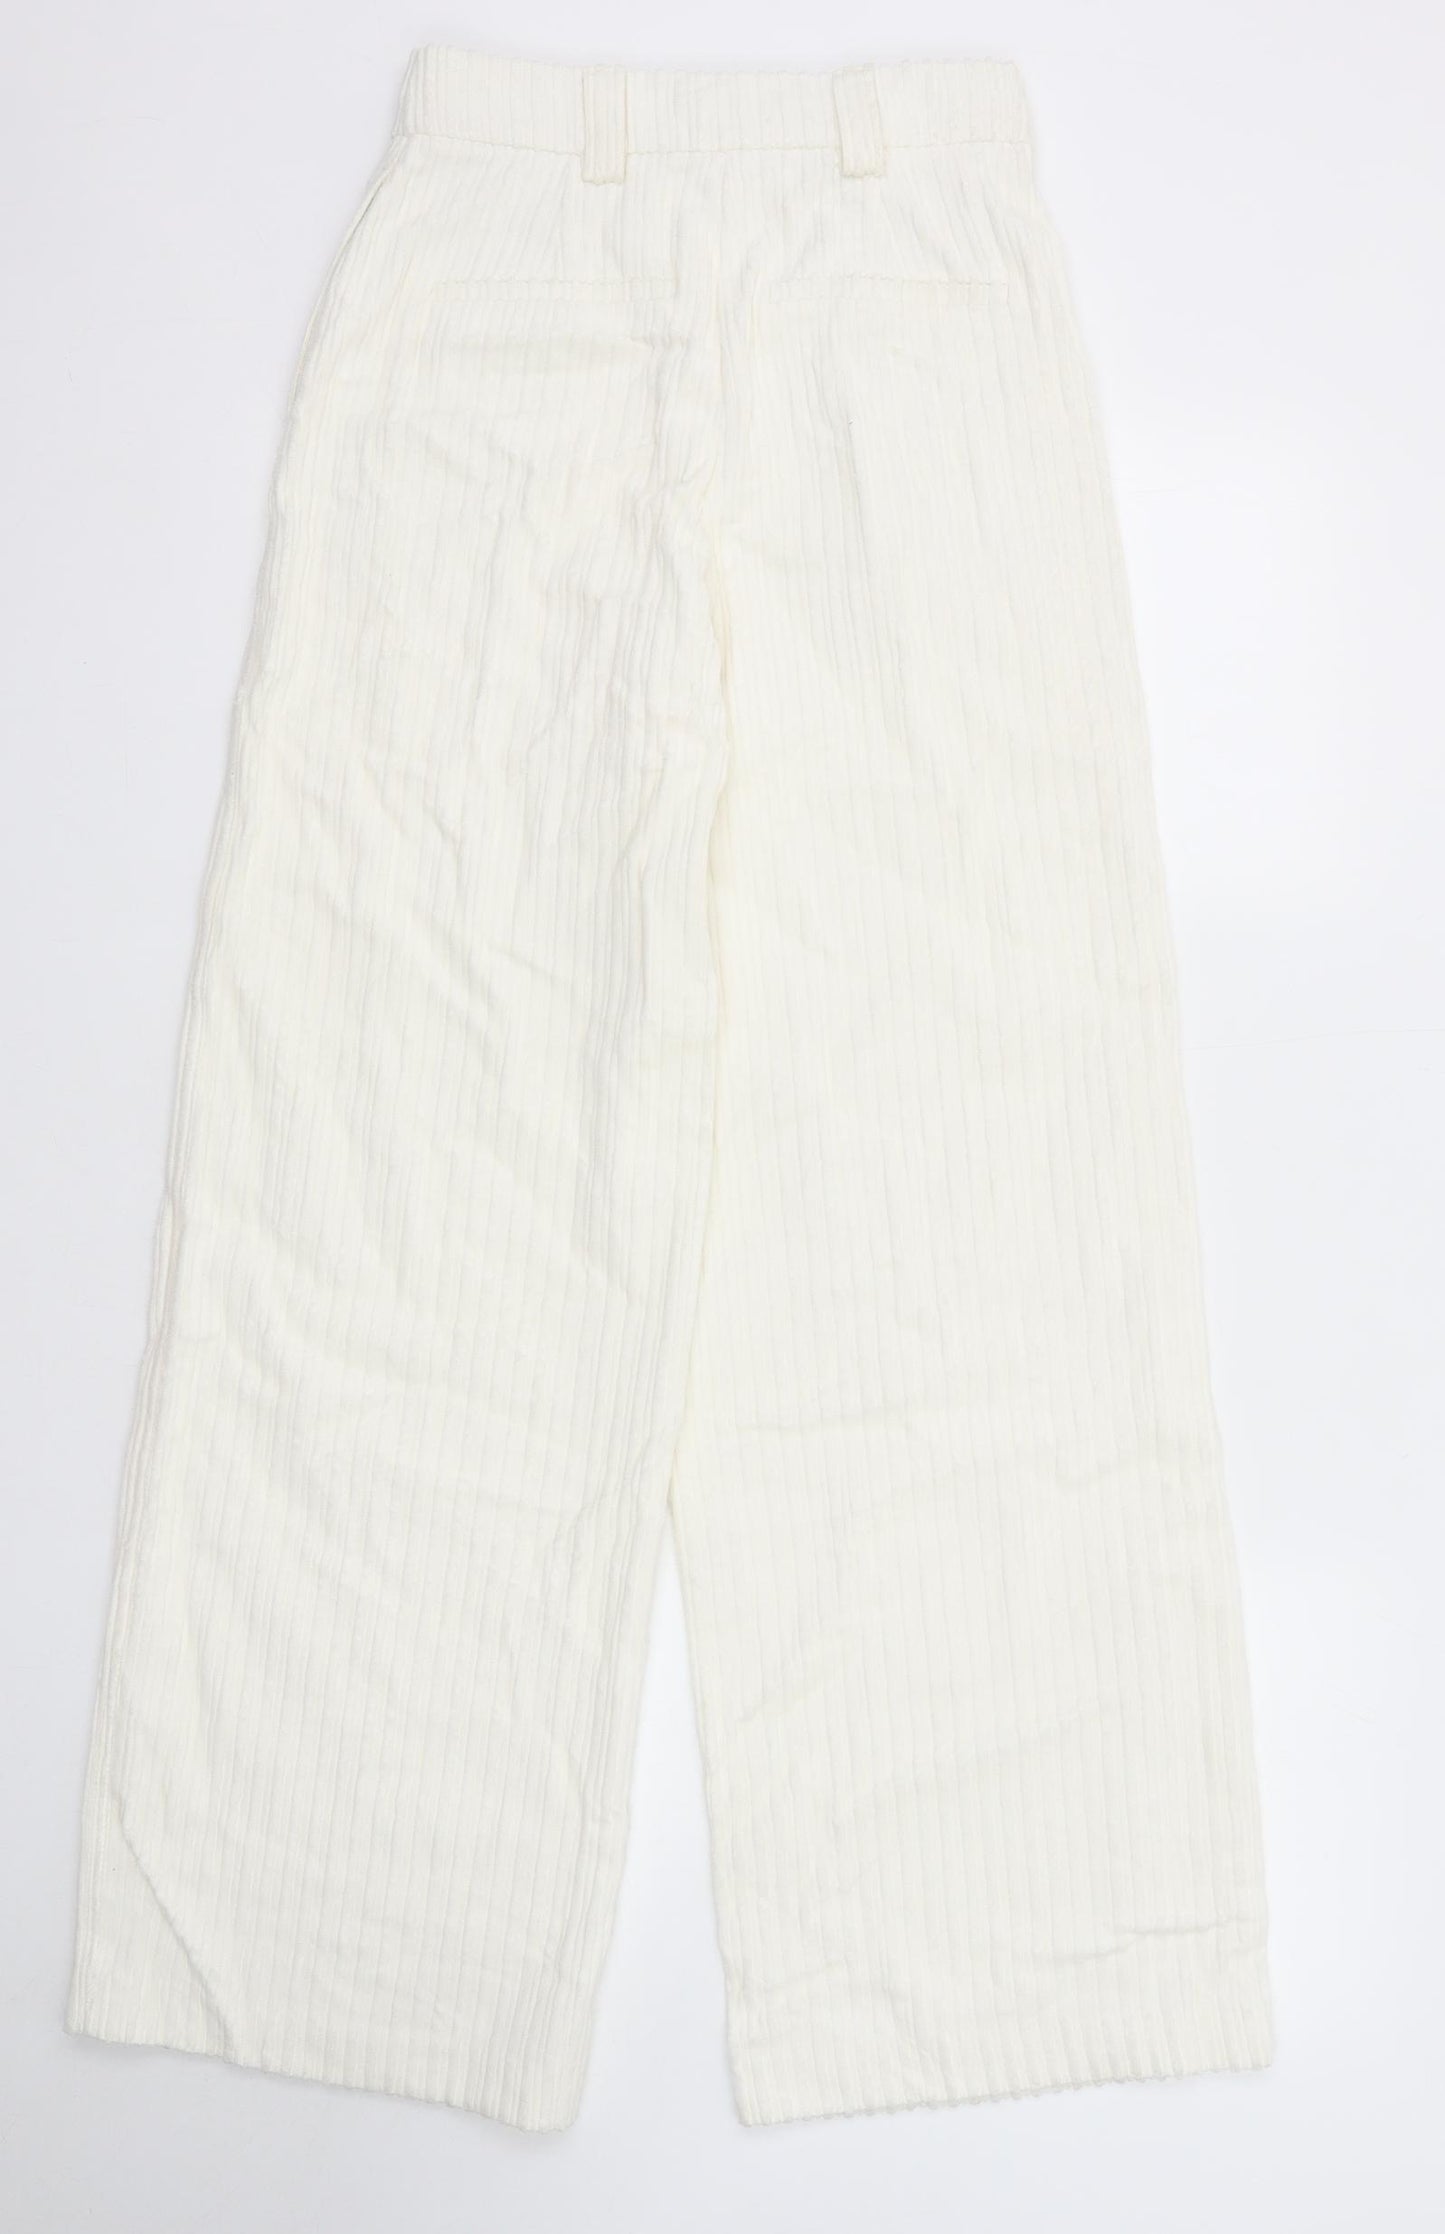 Marks and Spencer Womens White Cotton Trousers Size 6 Regular Zip